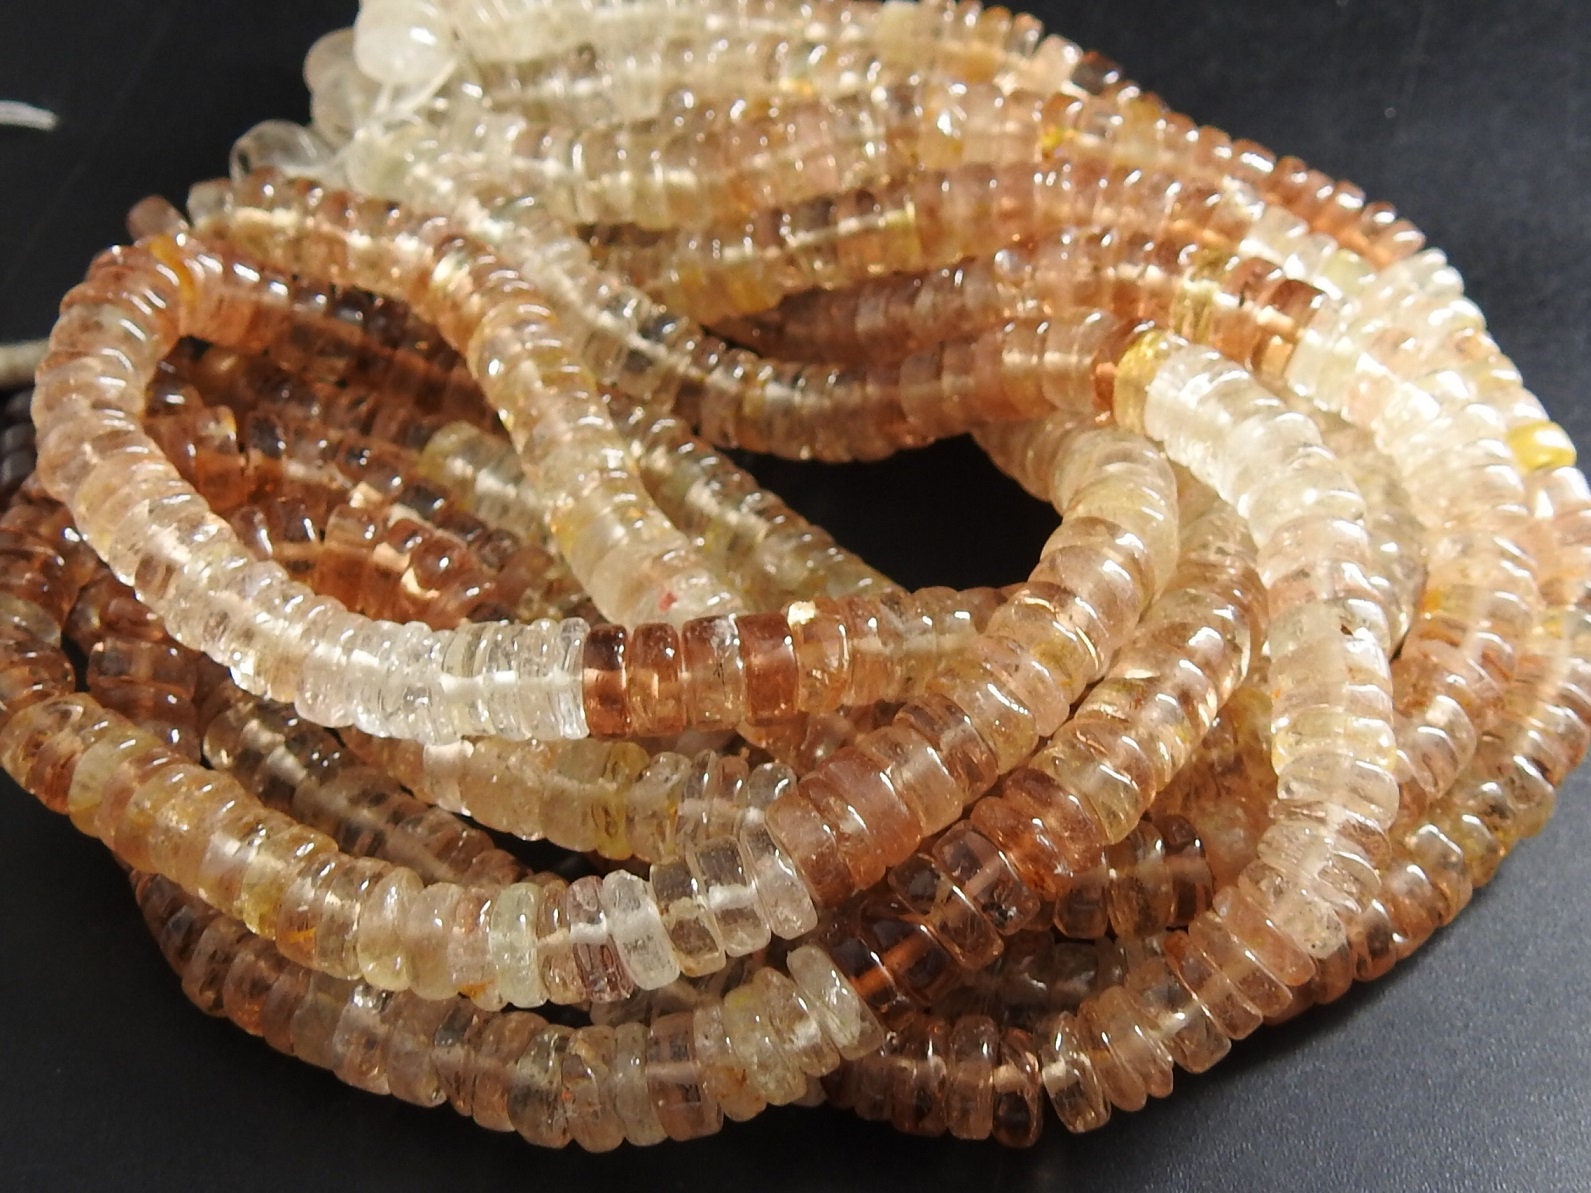 Imperial Topaz Smooth Tyres,Coin,Button Shape Bead,Multi Shaded,Loose Stone,Handmade,For Jewelry Makers,16Inch Strand,100%Natural PME-T2 | Save 33% - Rajasthan Living 23